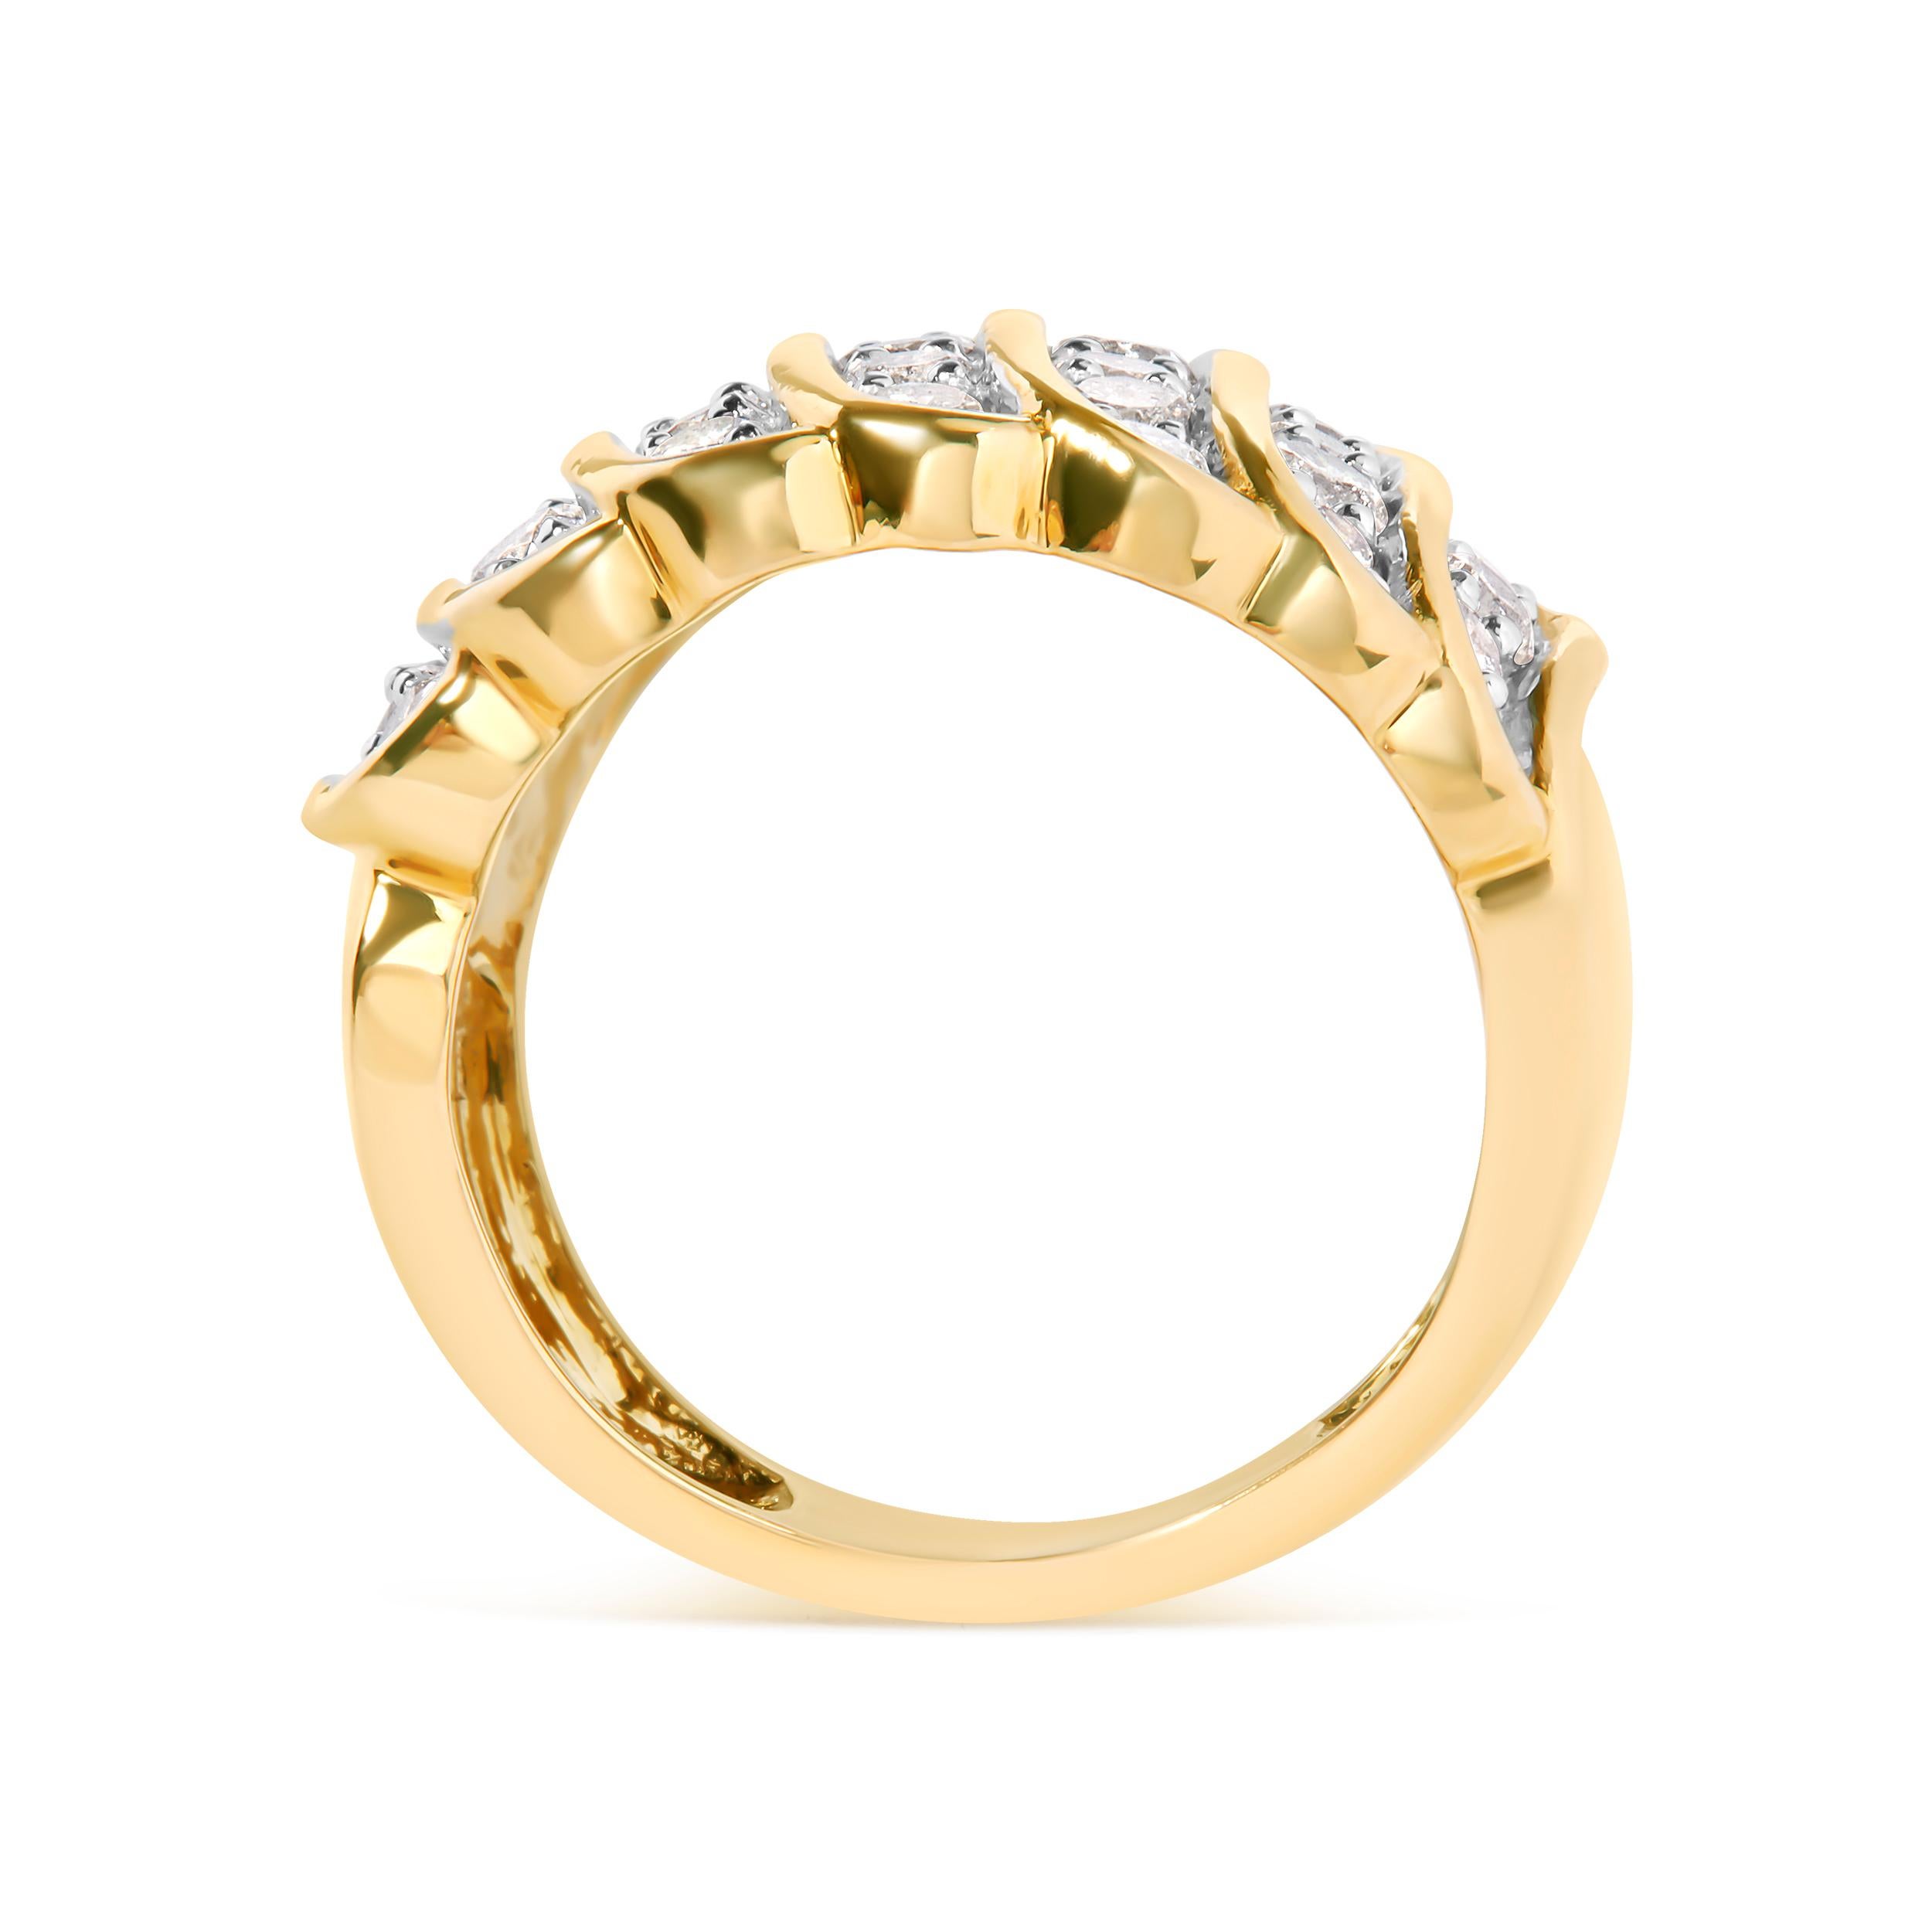 Strikingly beautiful, this stunning multi-row diamond band ring is crafted from genuine .925 sterling silver and plated with sparkling 14k yellow gold, a metal that will stay tarnish free for years to come! The ring has a vertical multi-row design